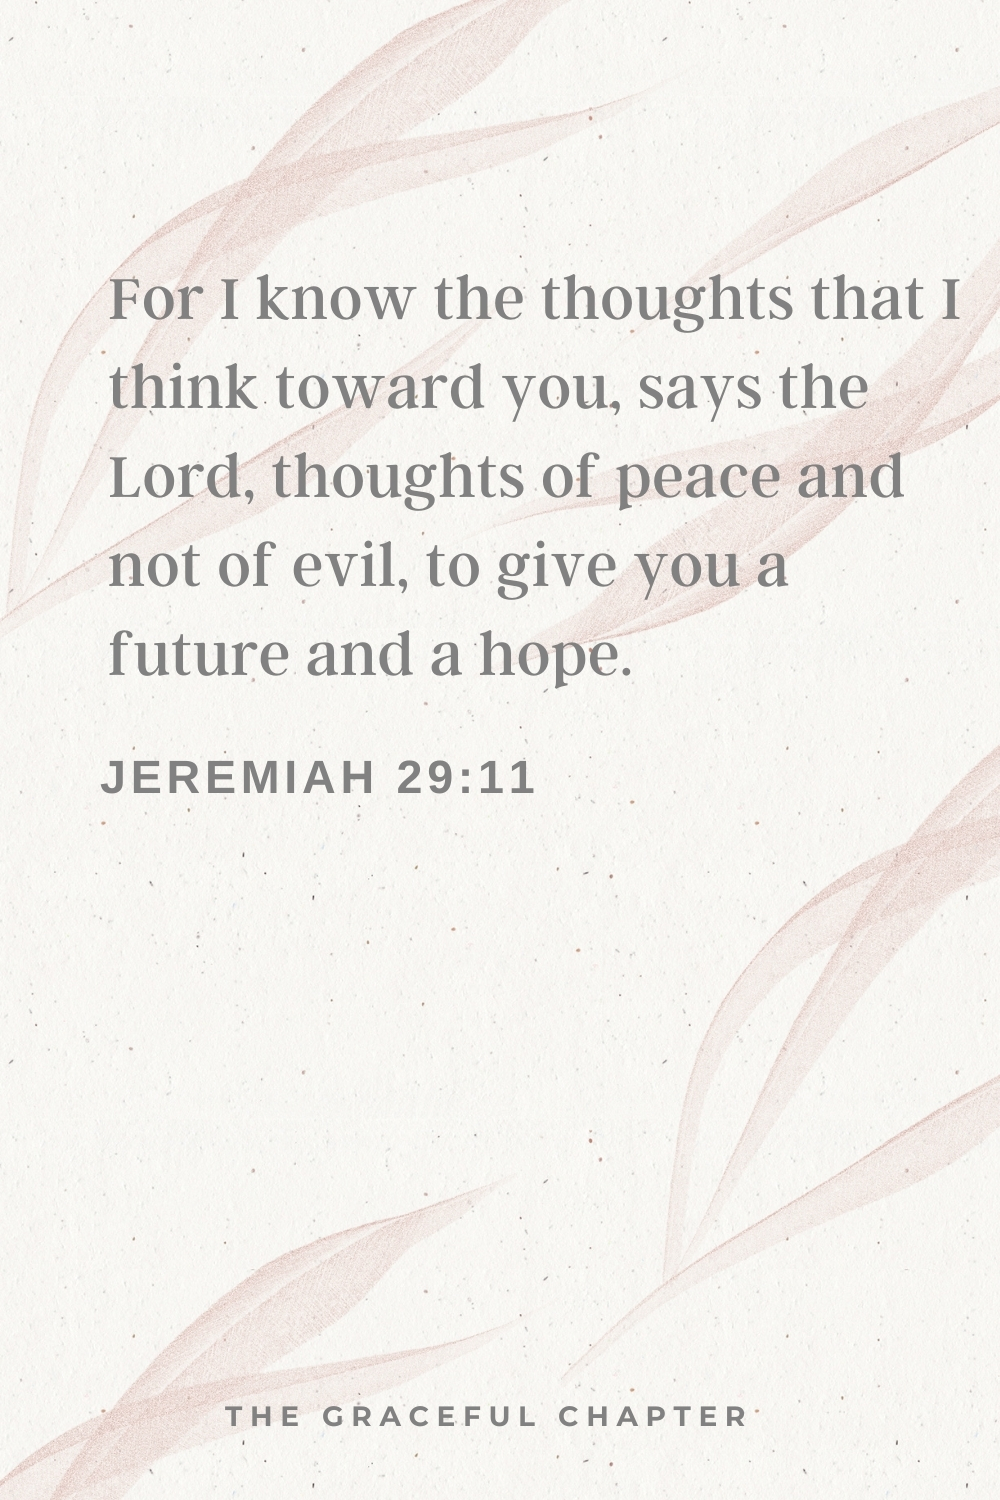 For I know the thoughts that I think toward you, says the Lord, thoughts of peace and not of evil, to give you a future and a hope. Jeremiah 29:11